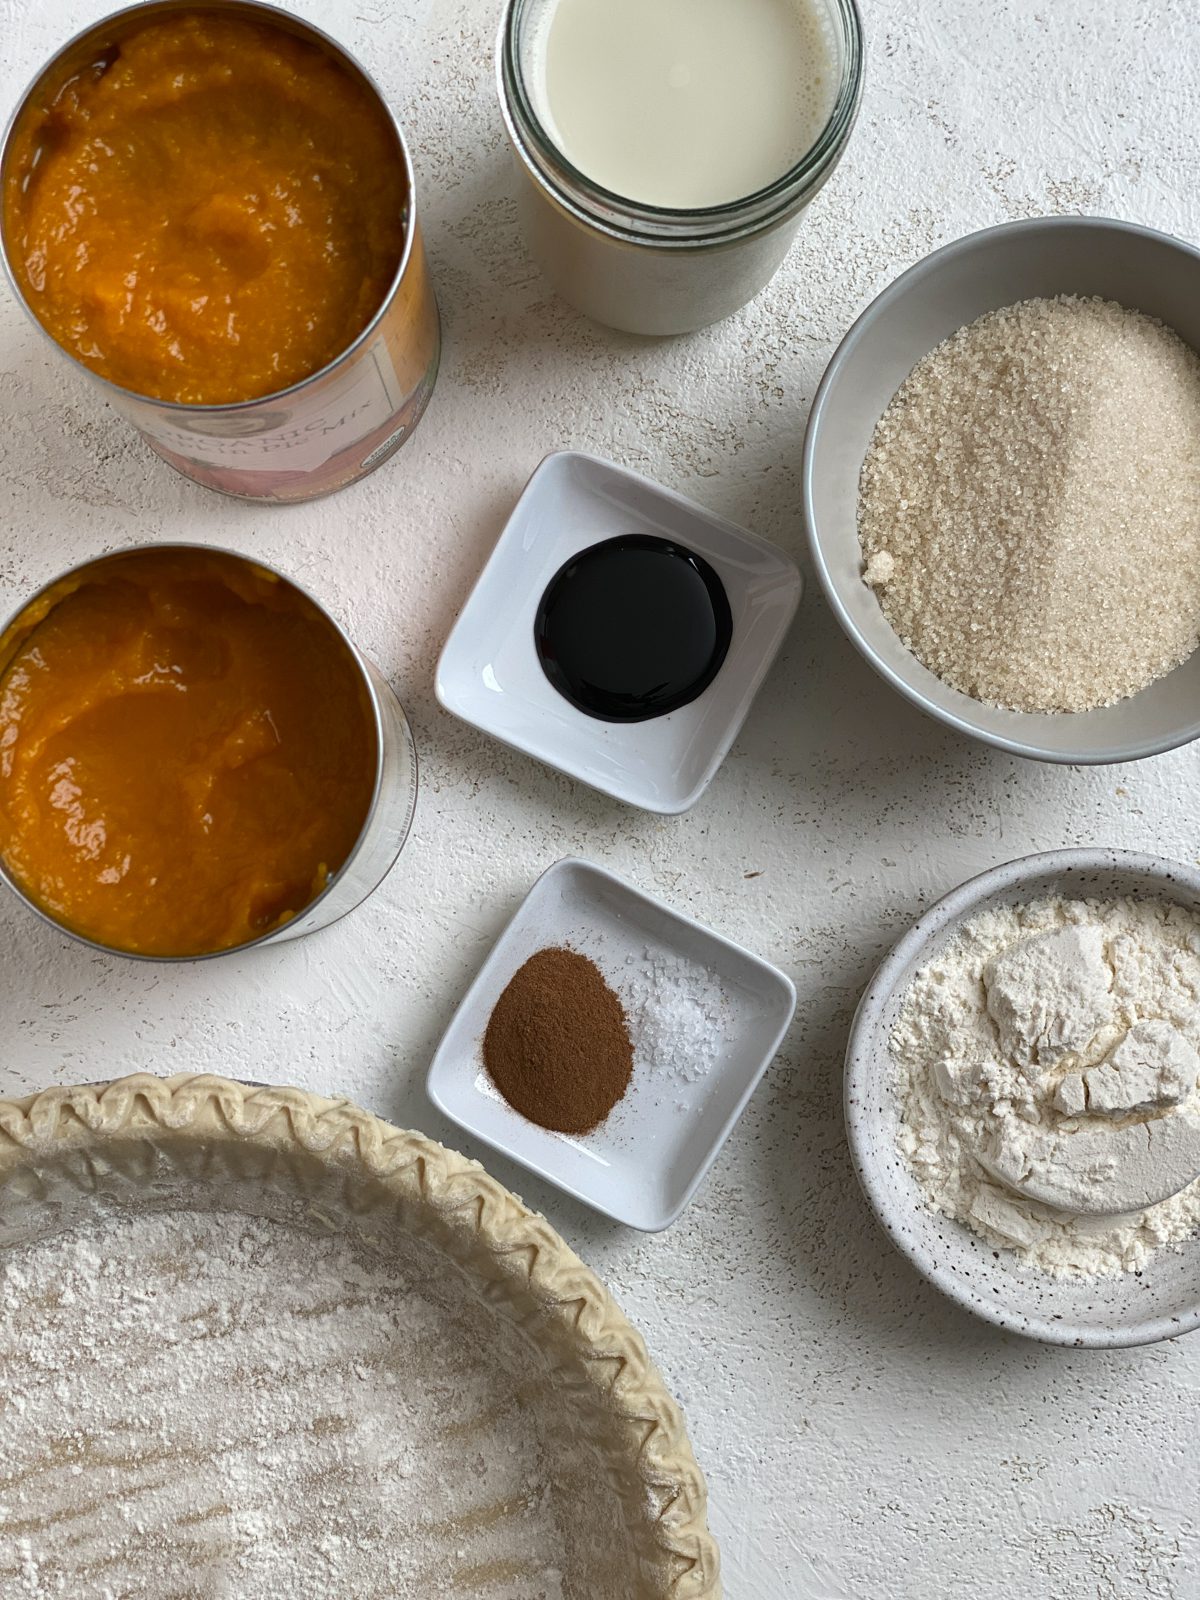 ingredients for Easy Vegan Pumpkin Pie measured out against a white surface